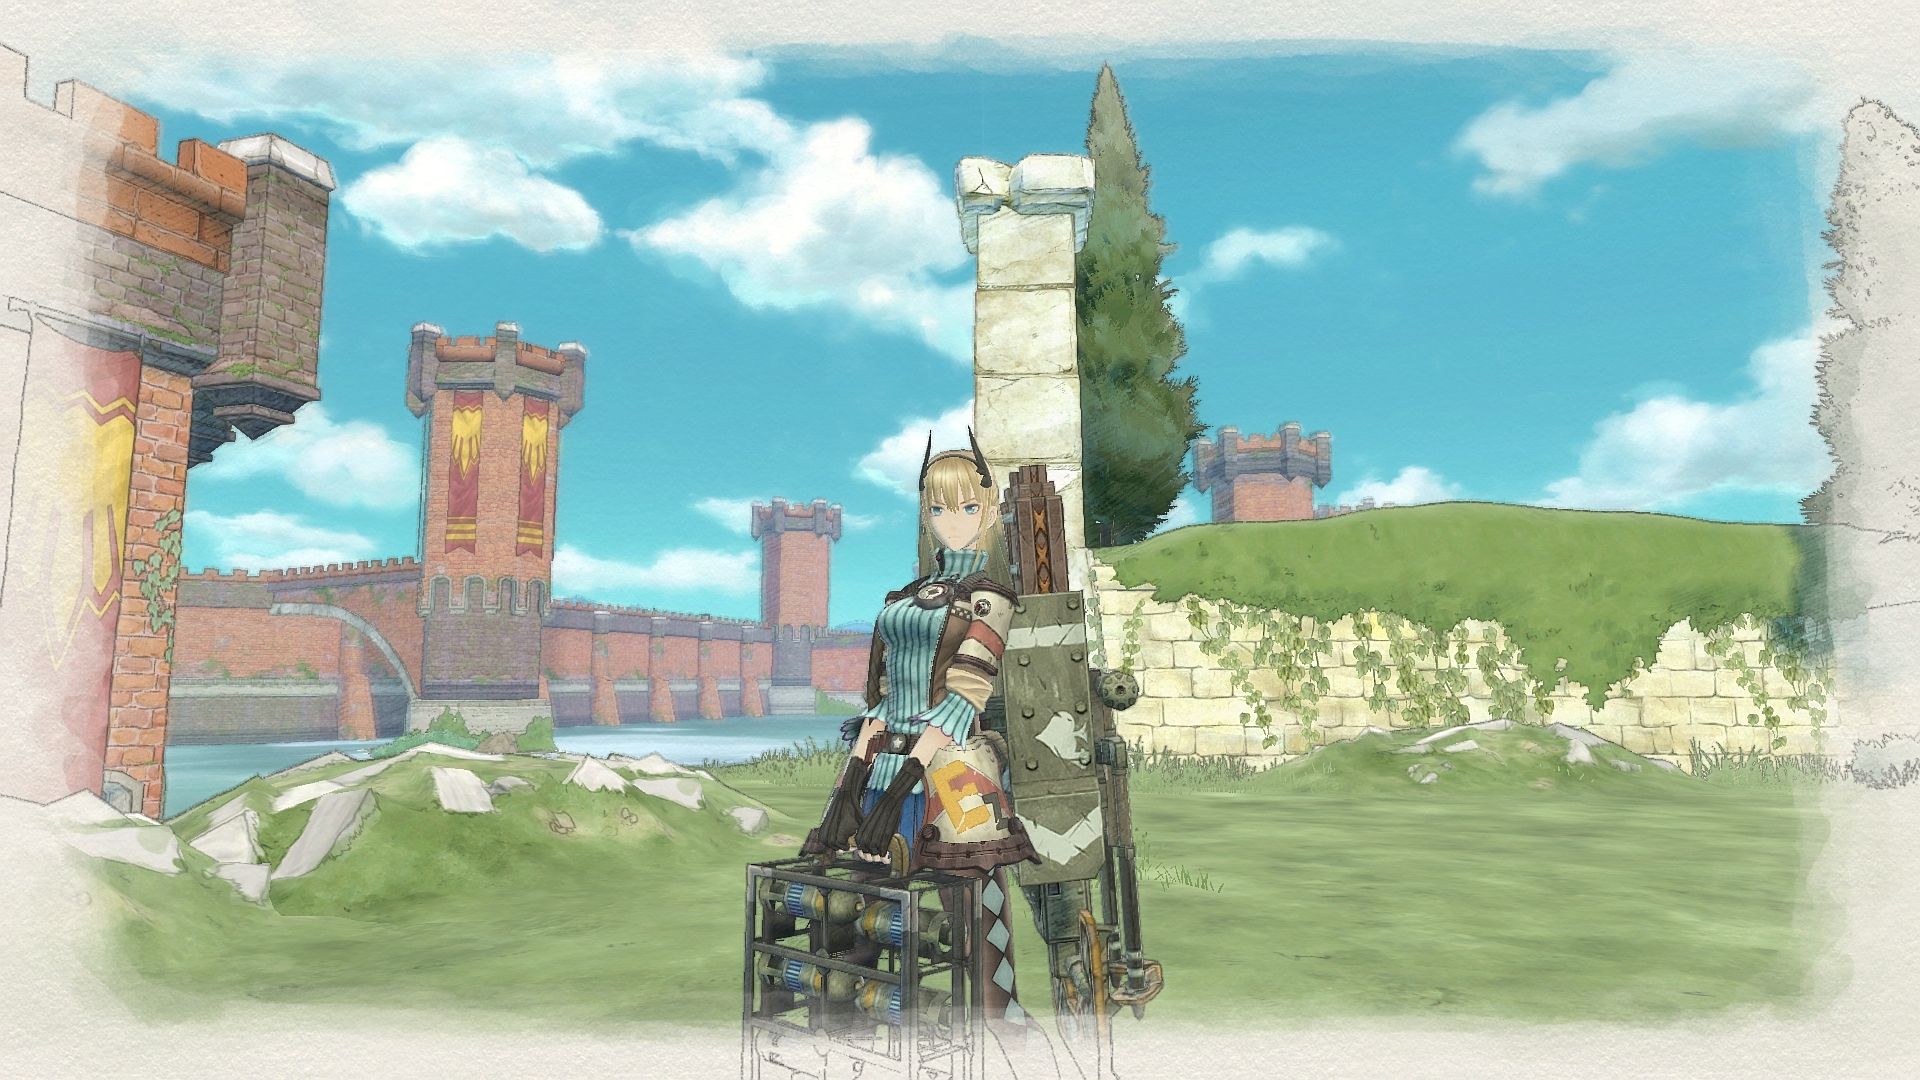 http://www.perfectly-nintendo.com/wp-content/gallery/valkyria-chronicles-4-27-12-2017/42.jpg